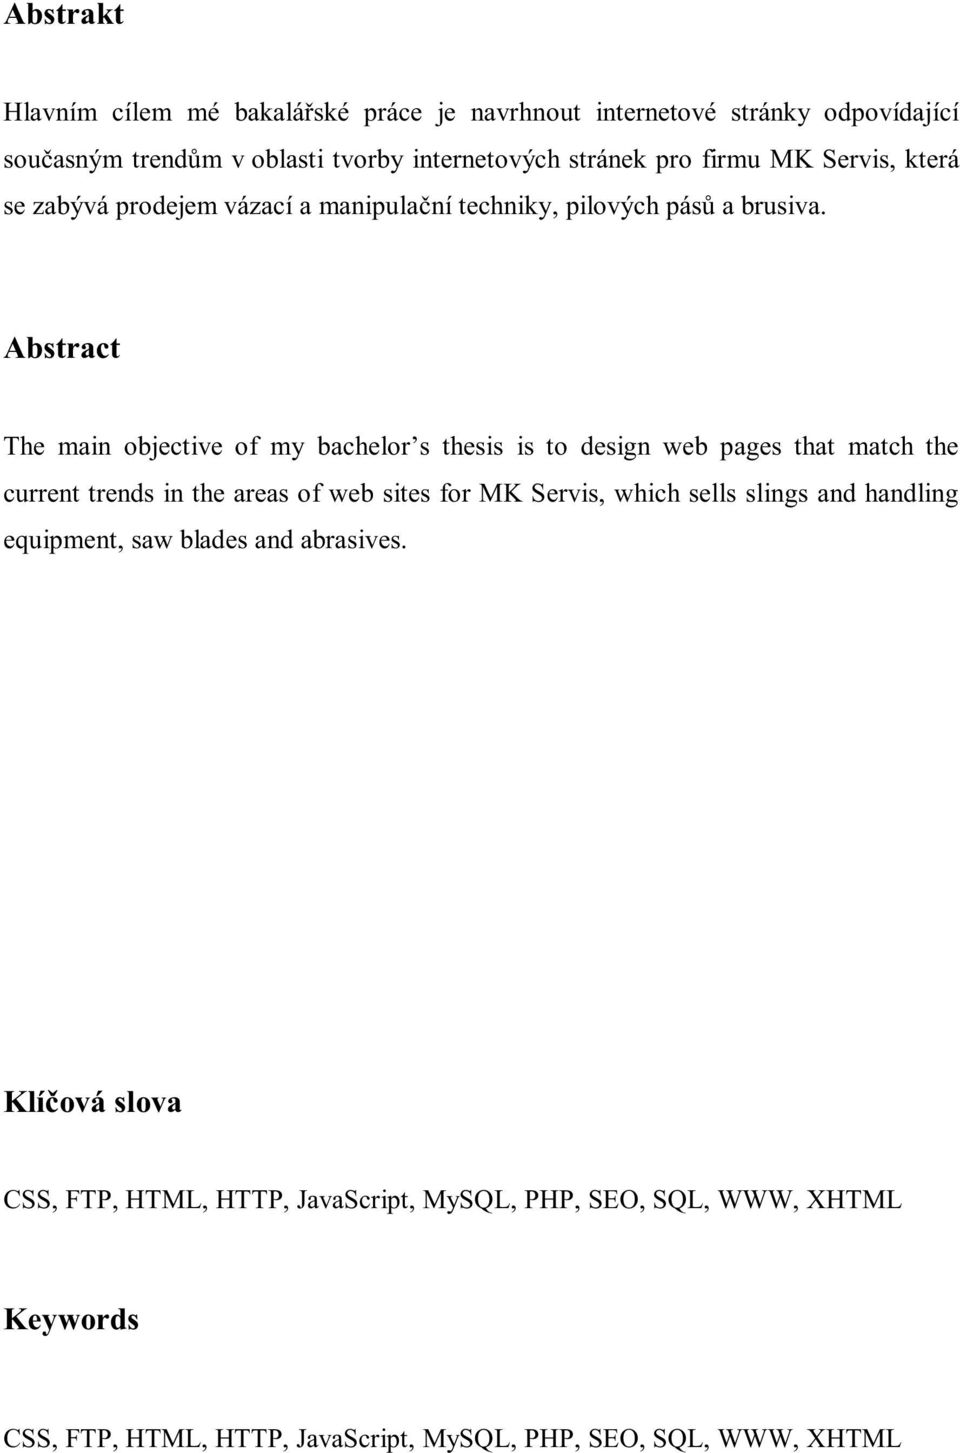 Abstract The main objective of my bachelor s thesis is to design web pages that match the current trends in the areas of web sites for MK Servis, which